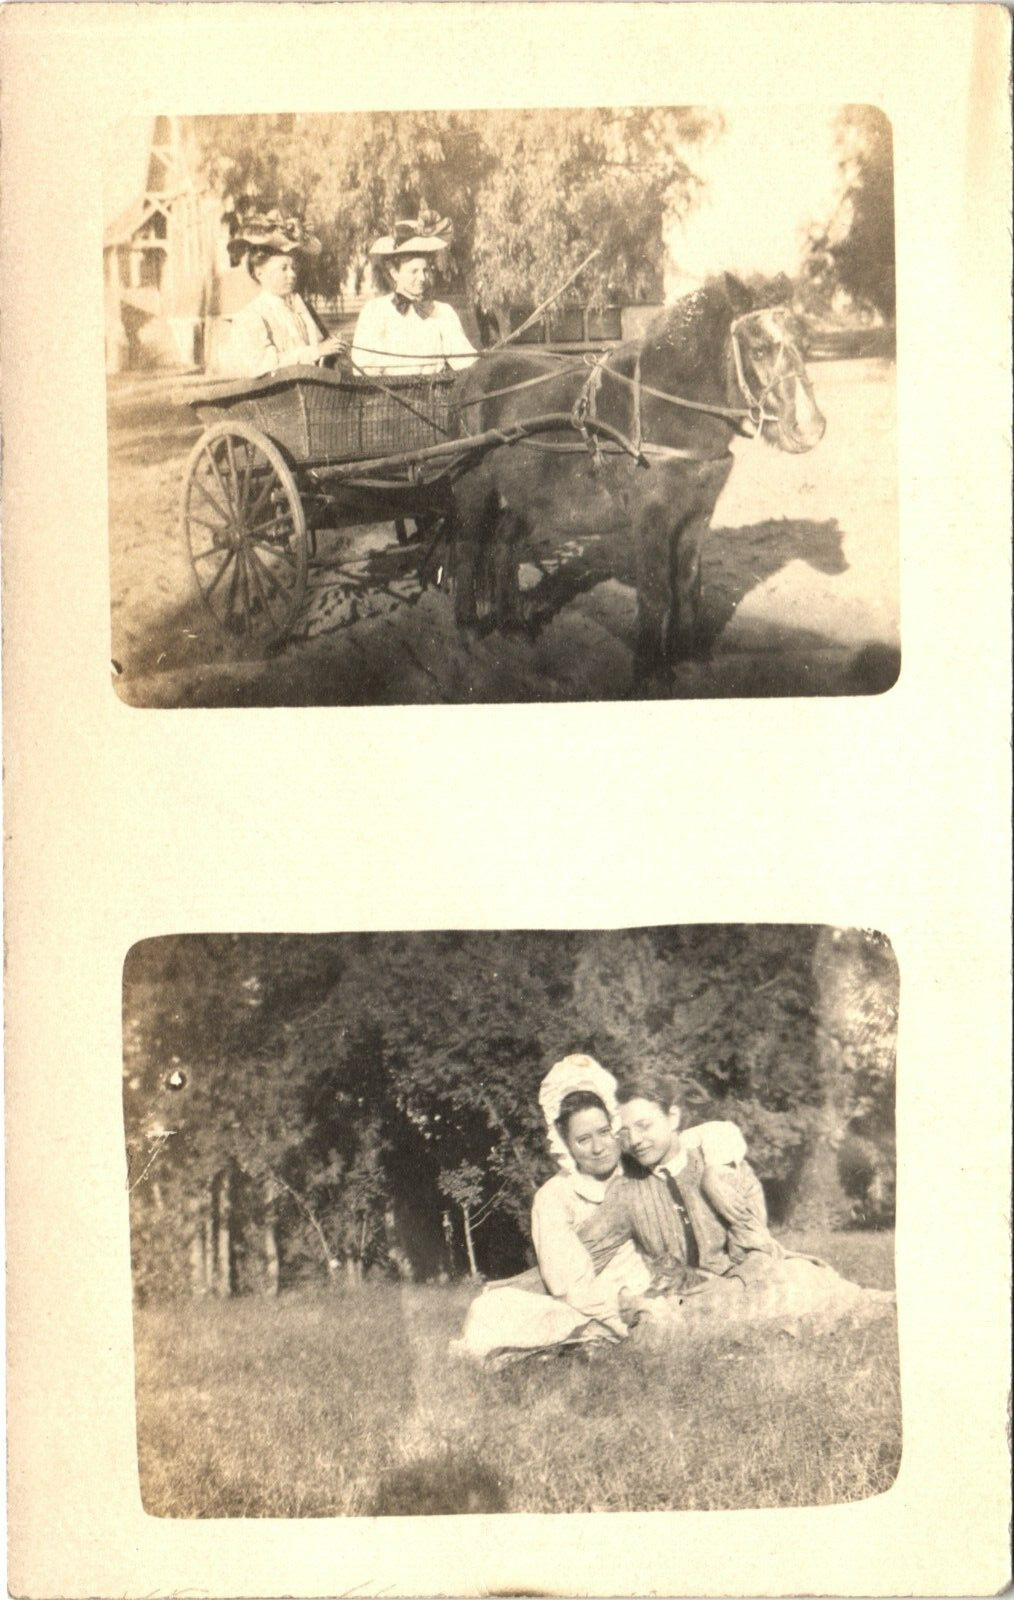 BEST FRIENDS IN WAGON antique real photo postcard rppc AFFECTIONATE LADIES c1910